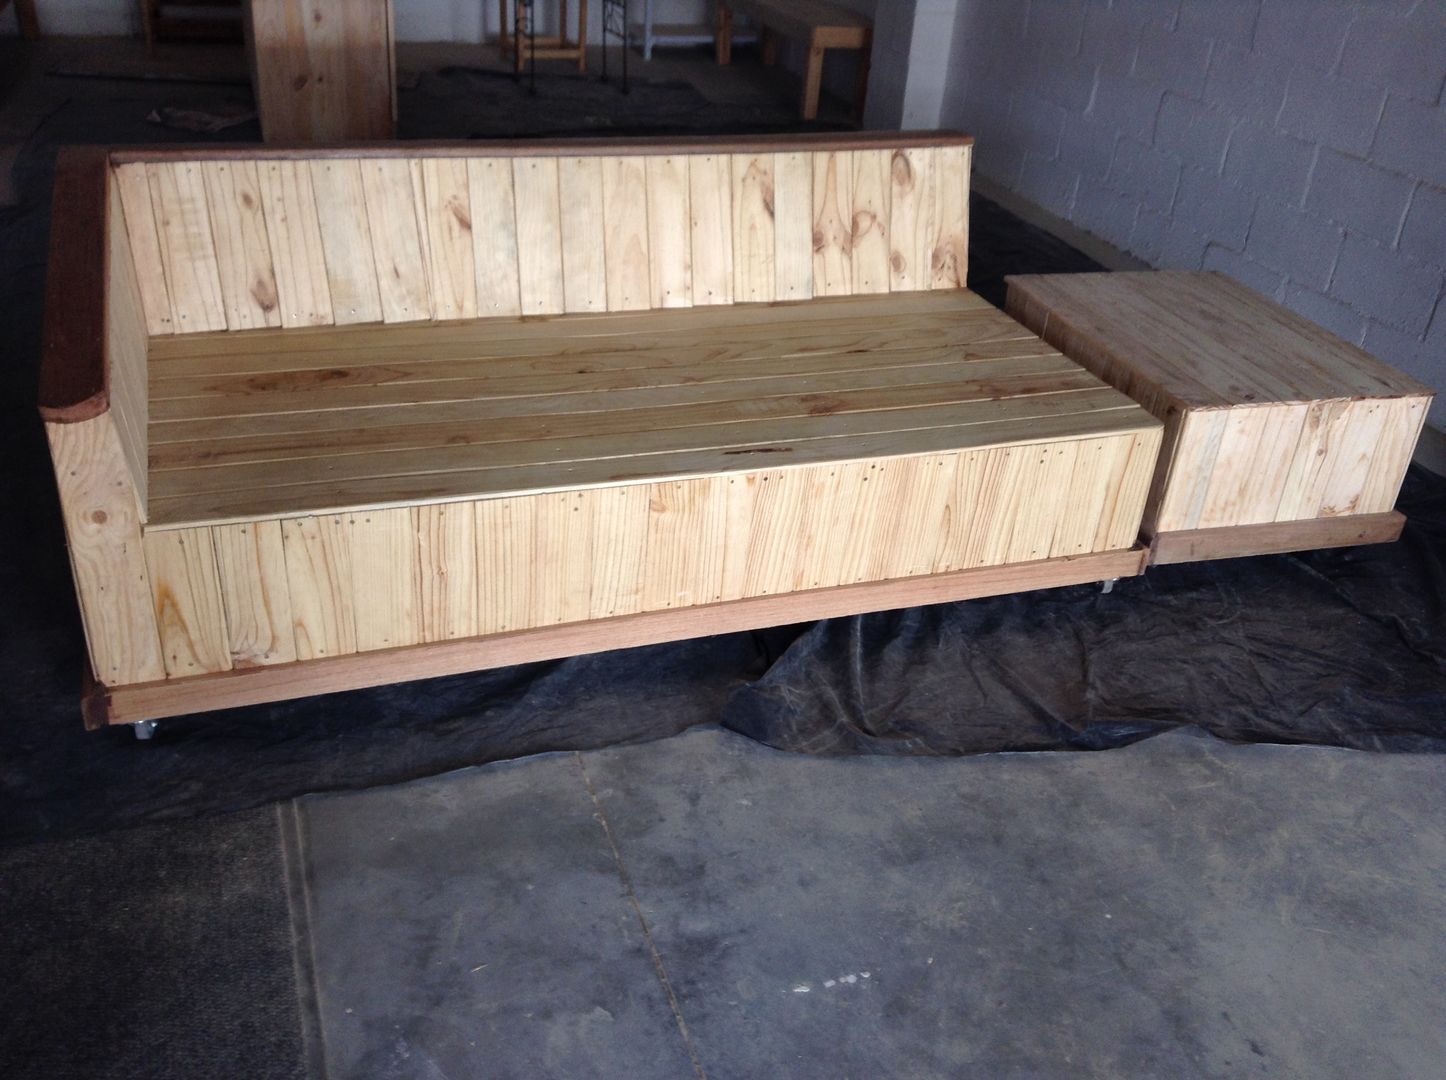 Four Seater Daybed/Couch, Pallet Furniture Cape Town Pallet Furniture Cape Town بلكونة أو شرفة أثاث